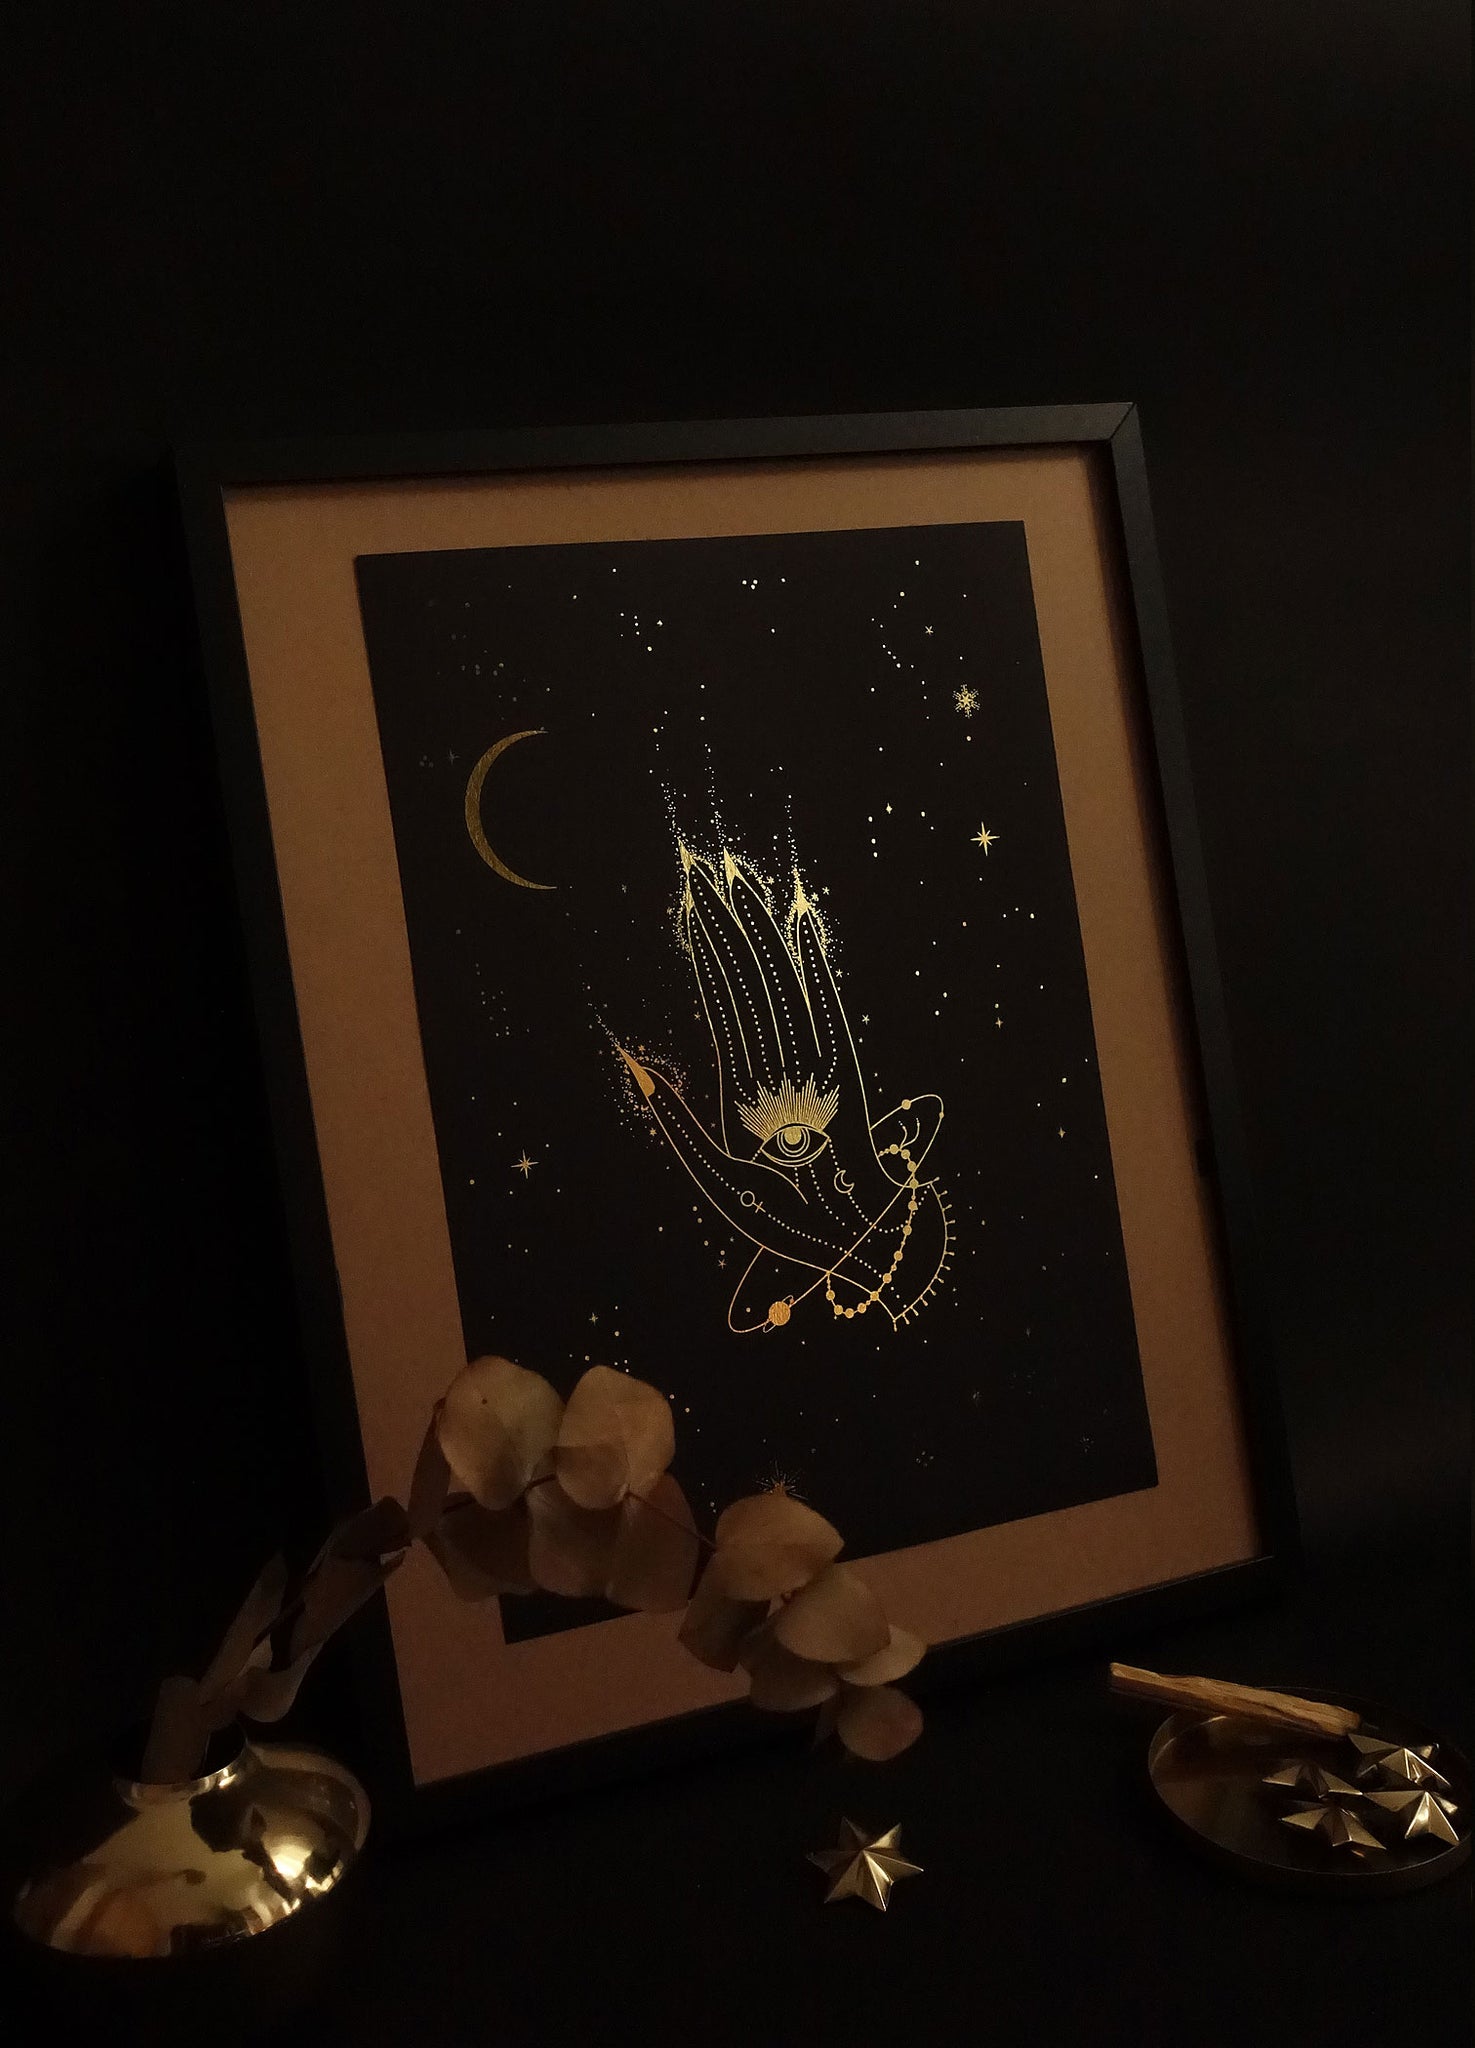 New Moon hands art print in gold foil and black paper with stars and moon by Cocorrina